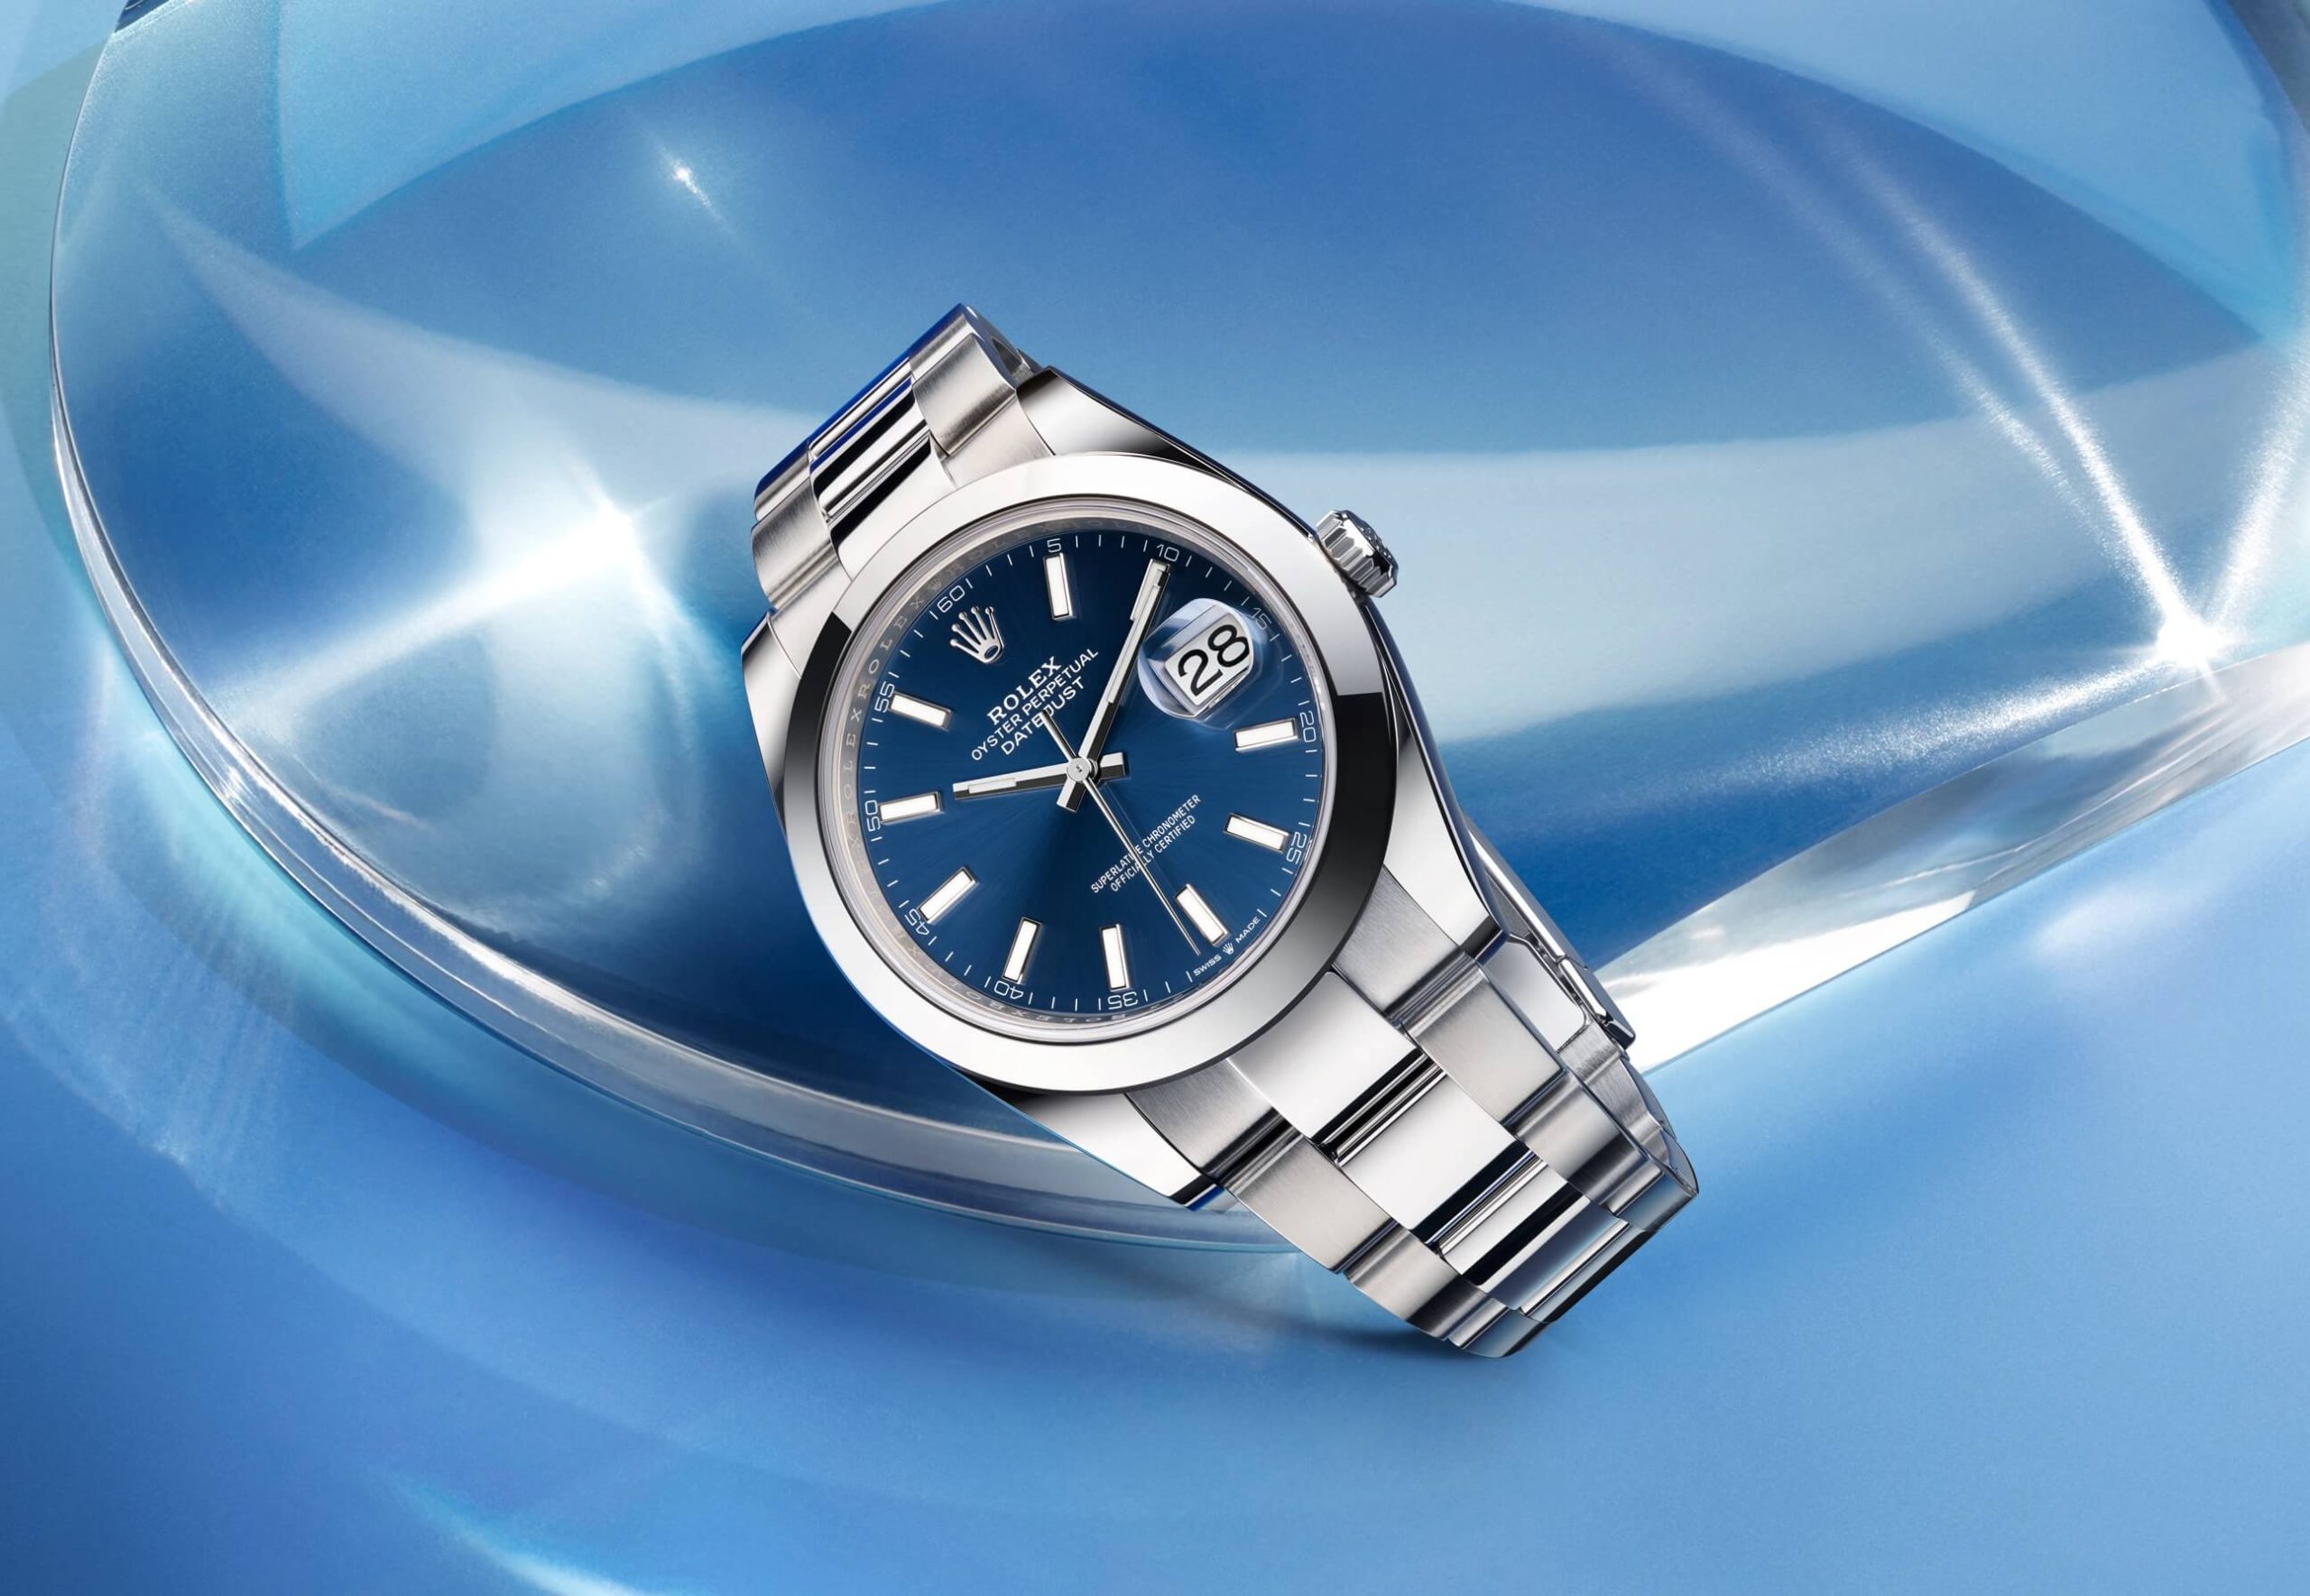 Rolex Datejust M126300 0001 At Cortina Watch Image Scaled